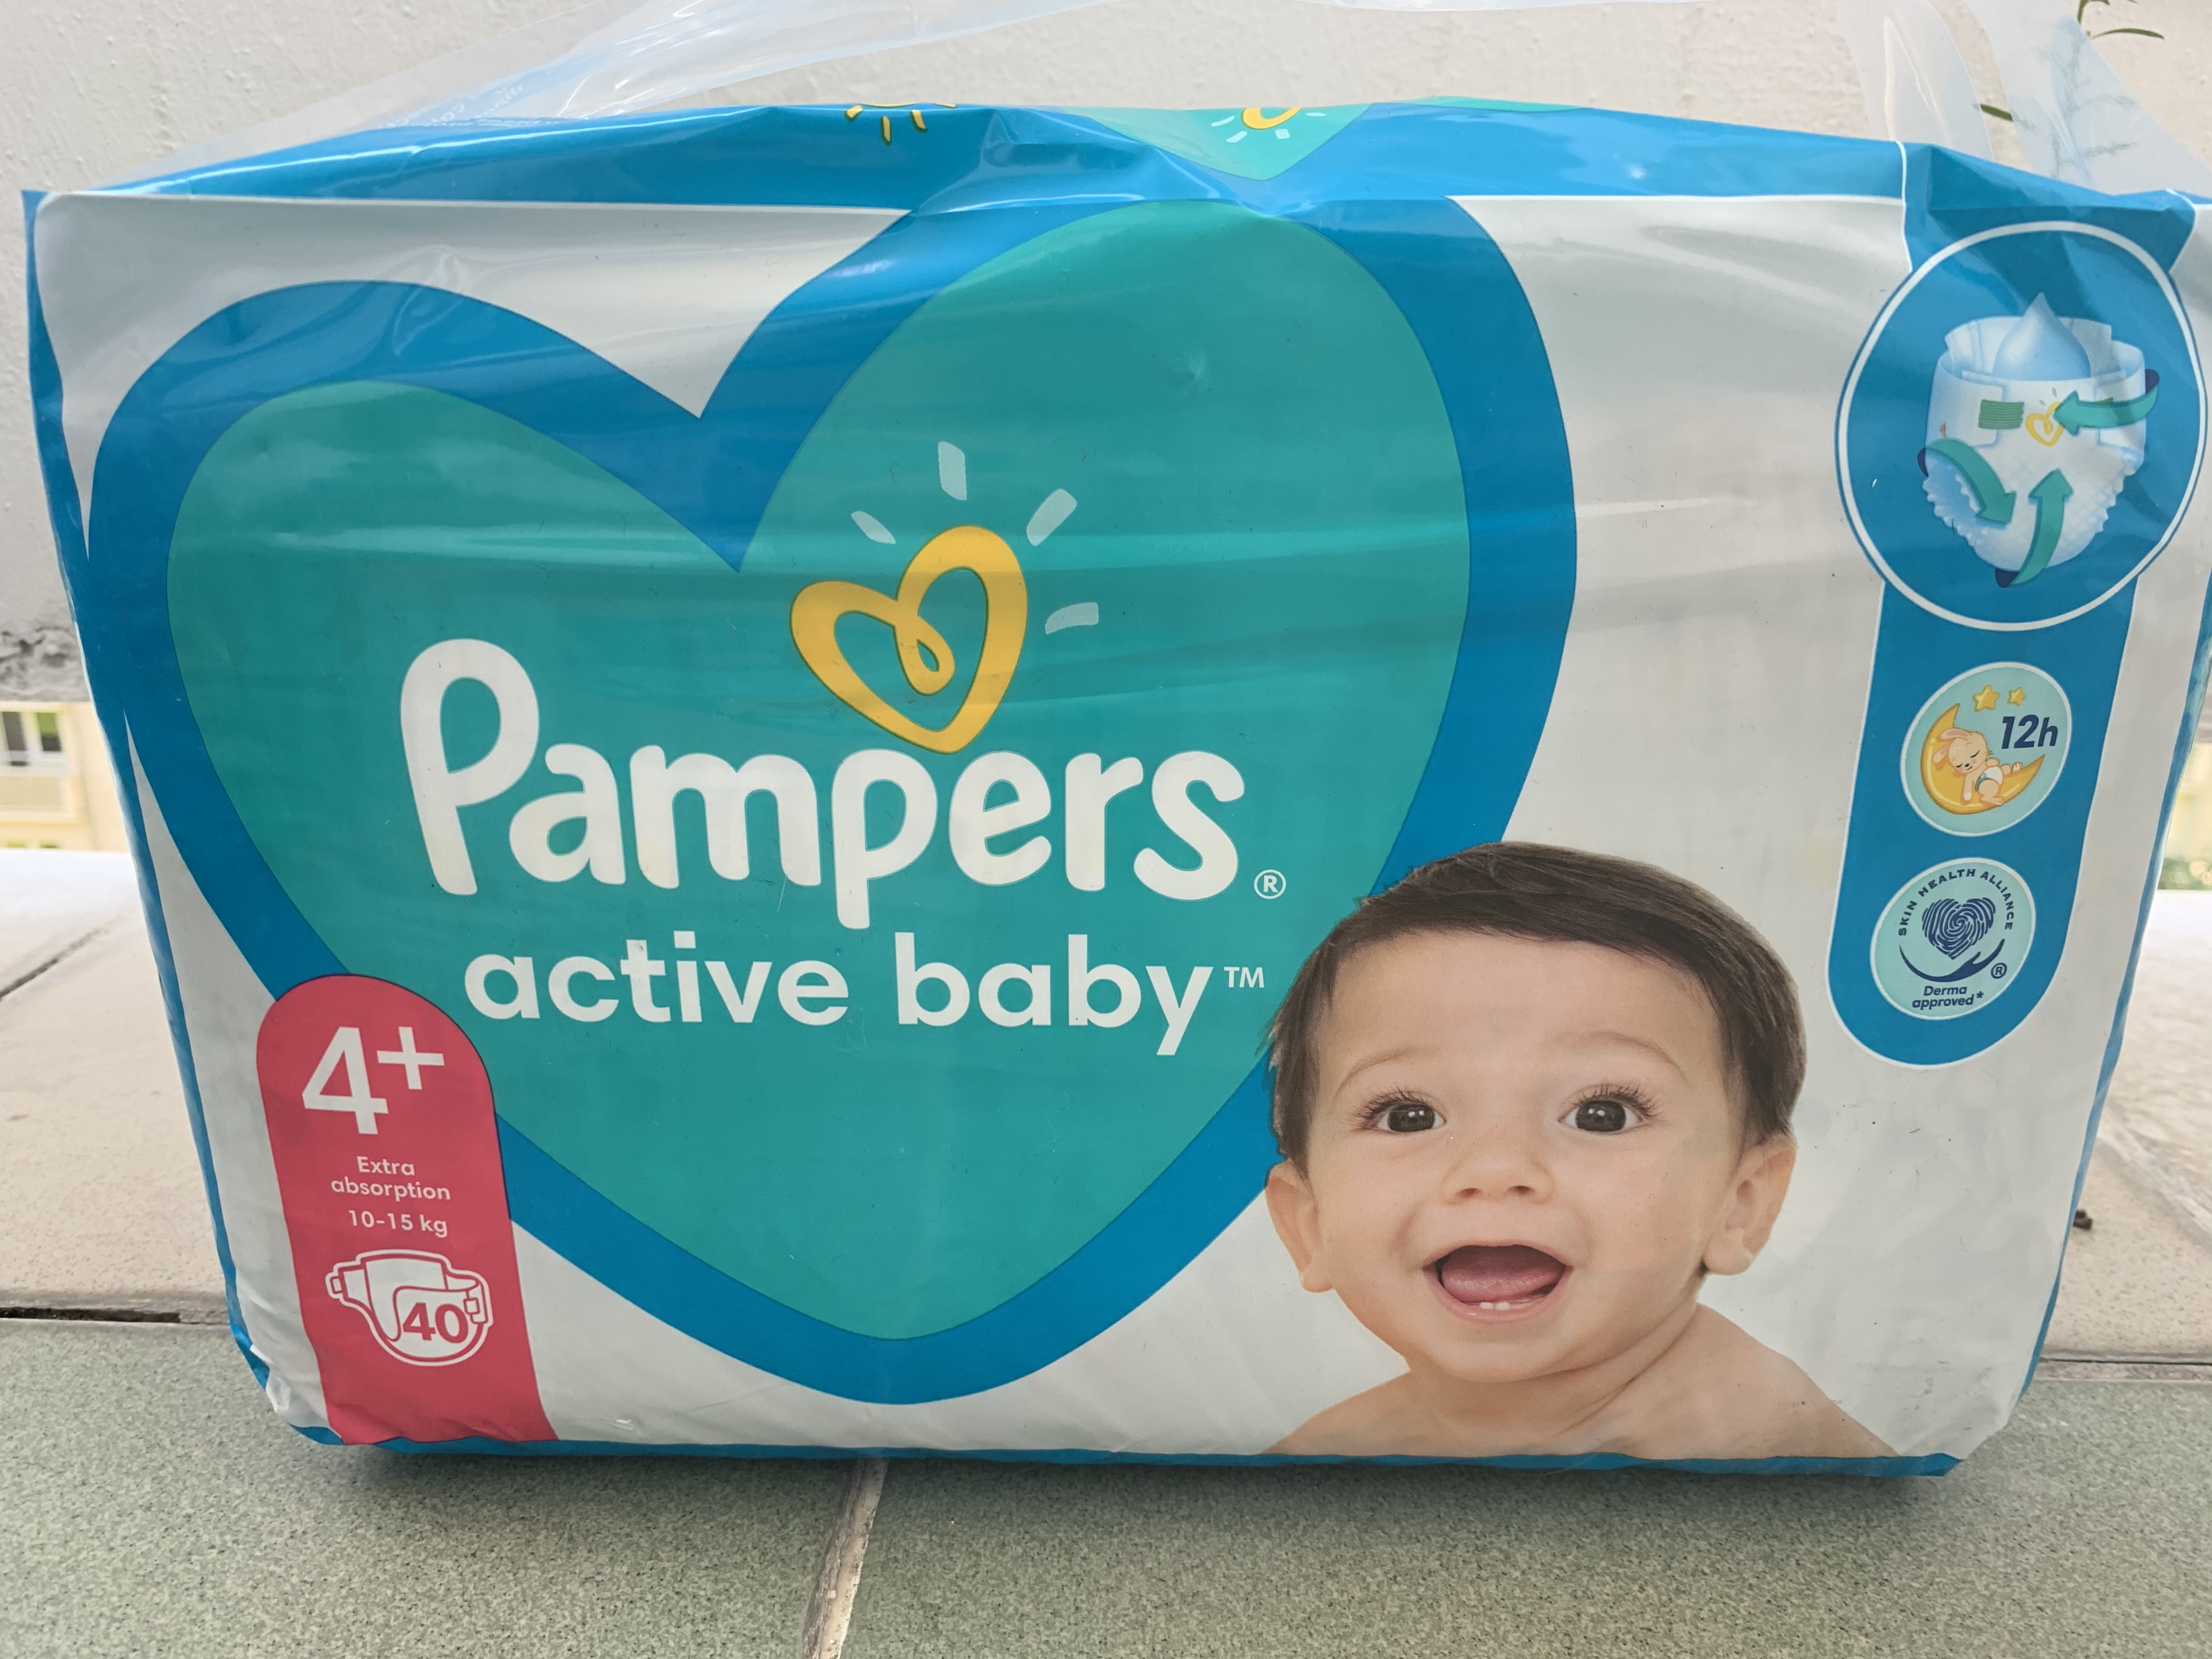 Pampers 4+, 40 ks ACTIVE BABY